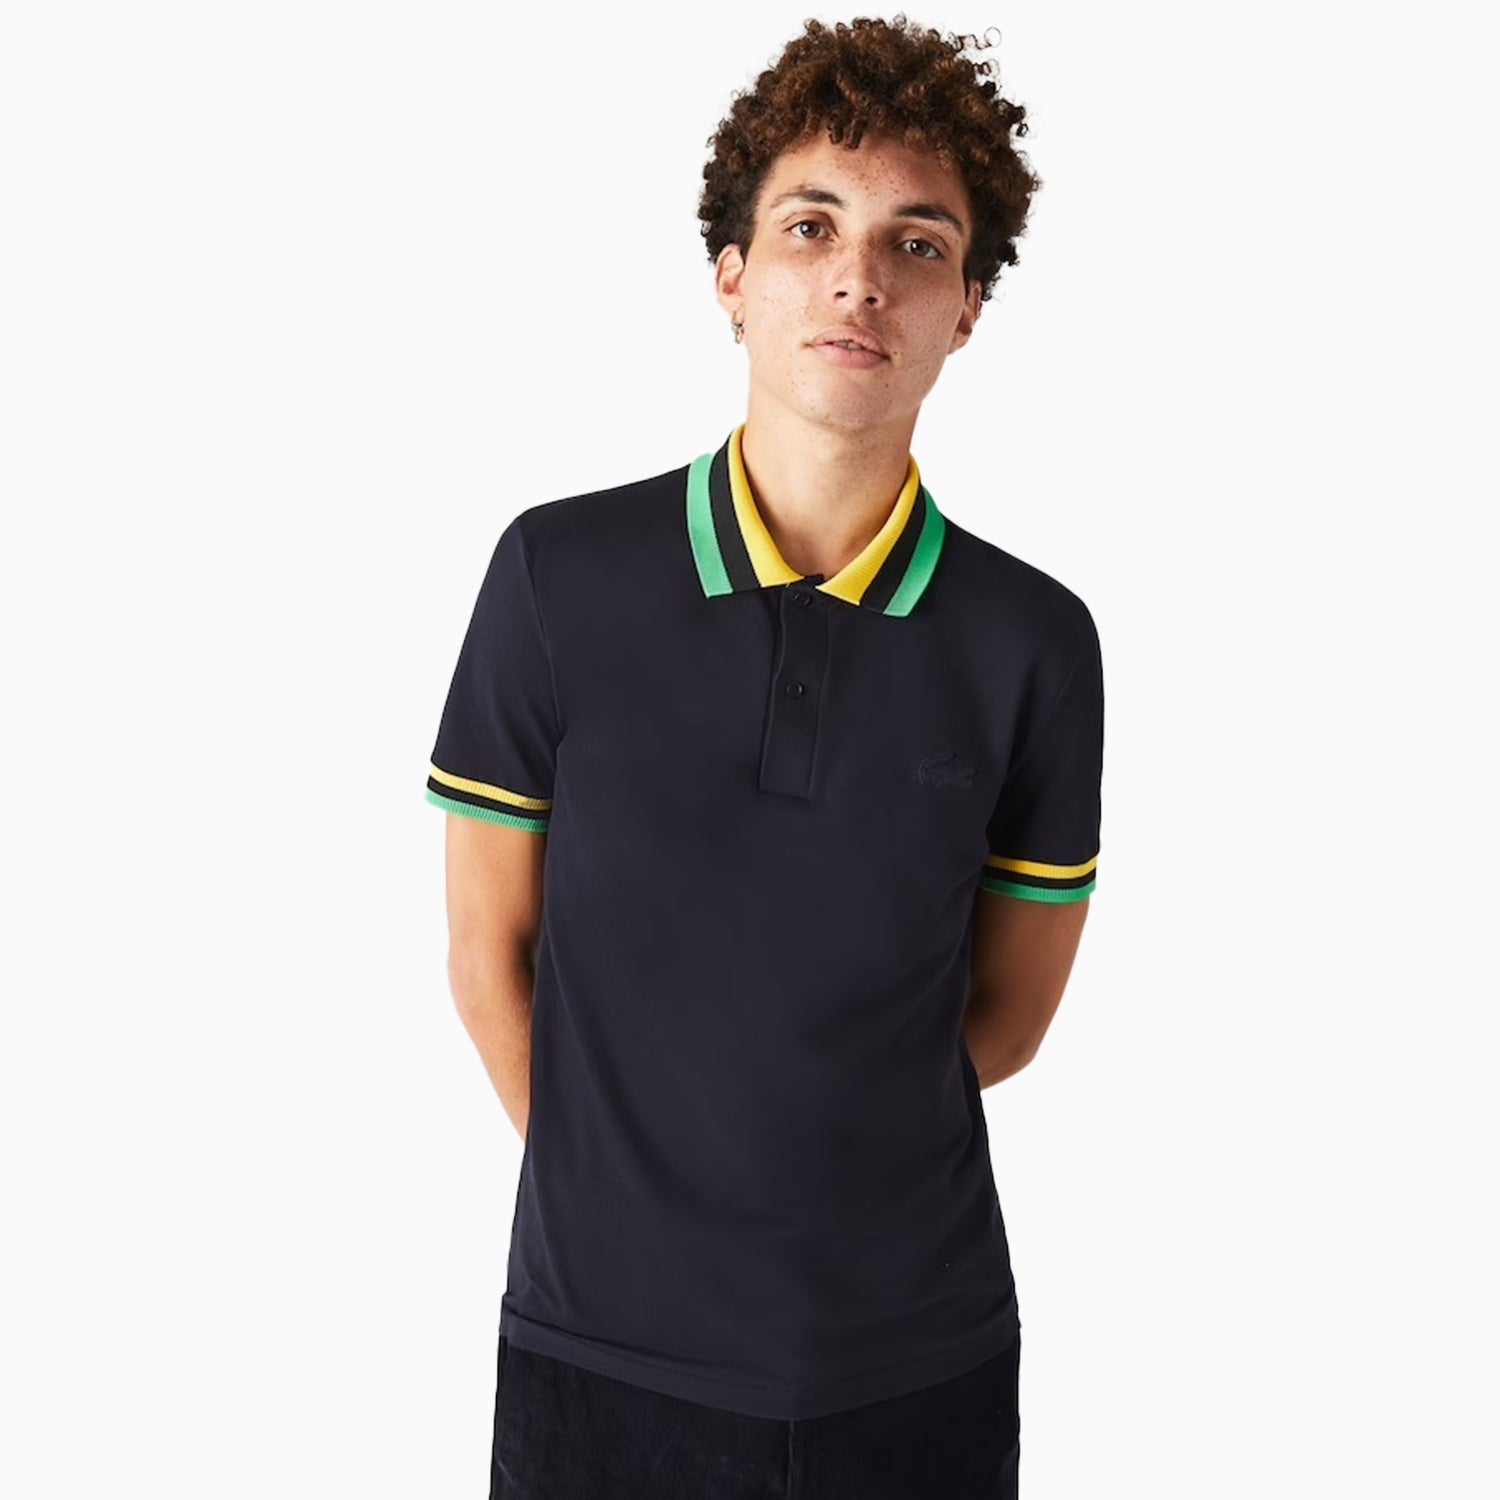 lacoste-mens-slim-fit-light-breathable-polo-shirt-ph7658-wyf